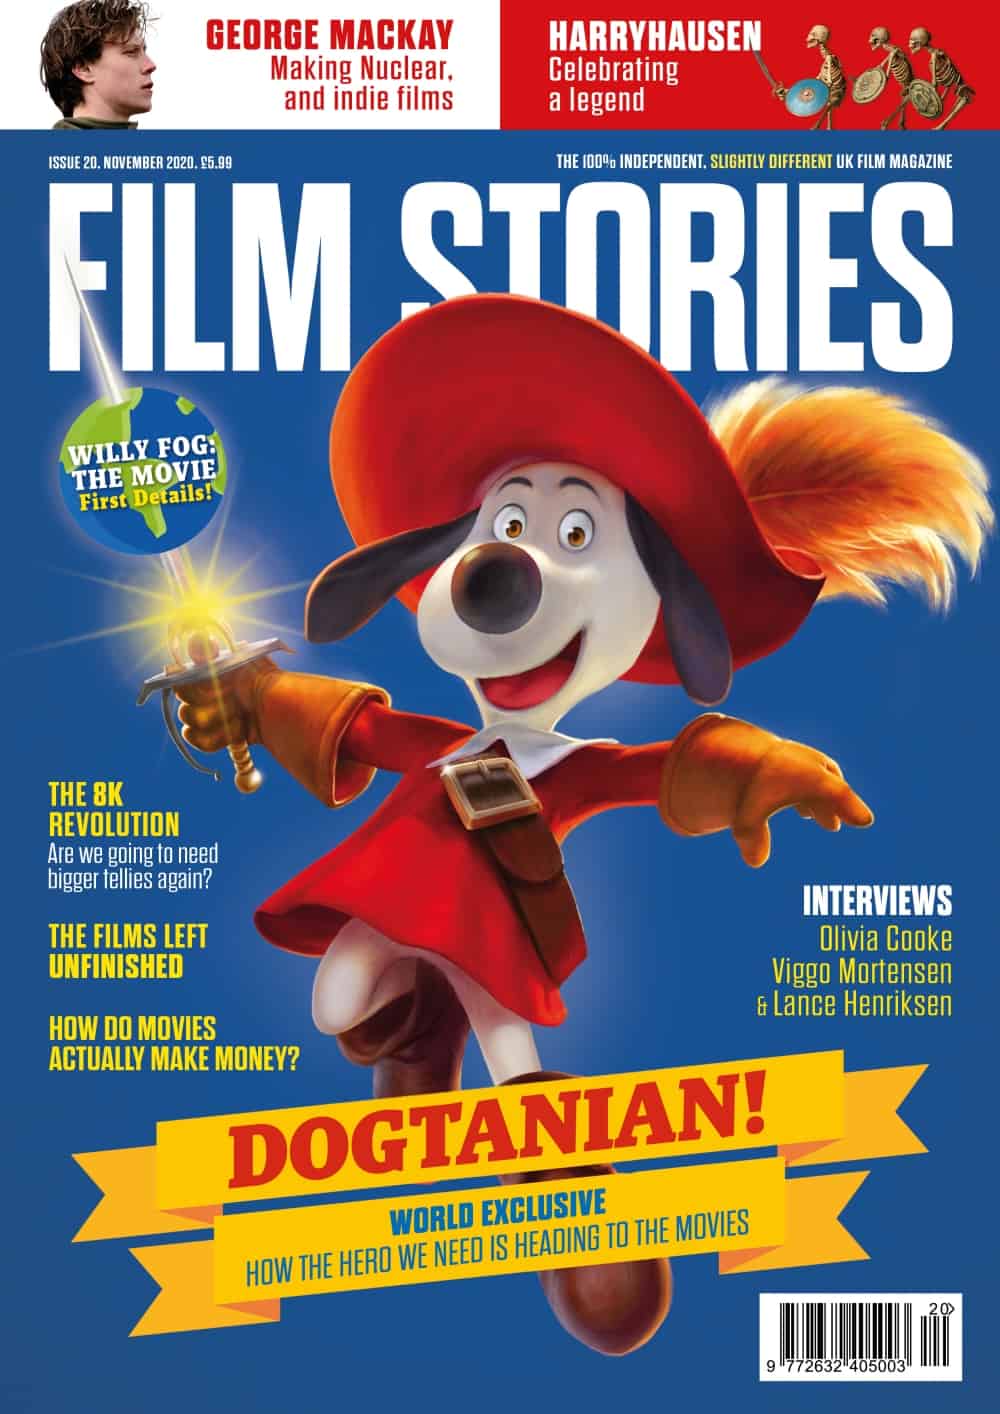 EXCLUSIVE! — Dogtanian and the Three Muskehounds (2021) | FULL ONLINE MOVIE 1080pHD